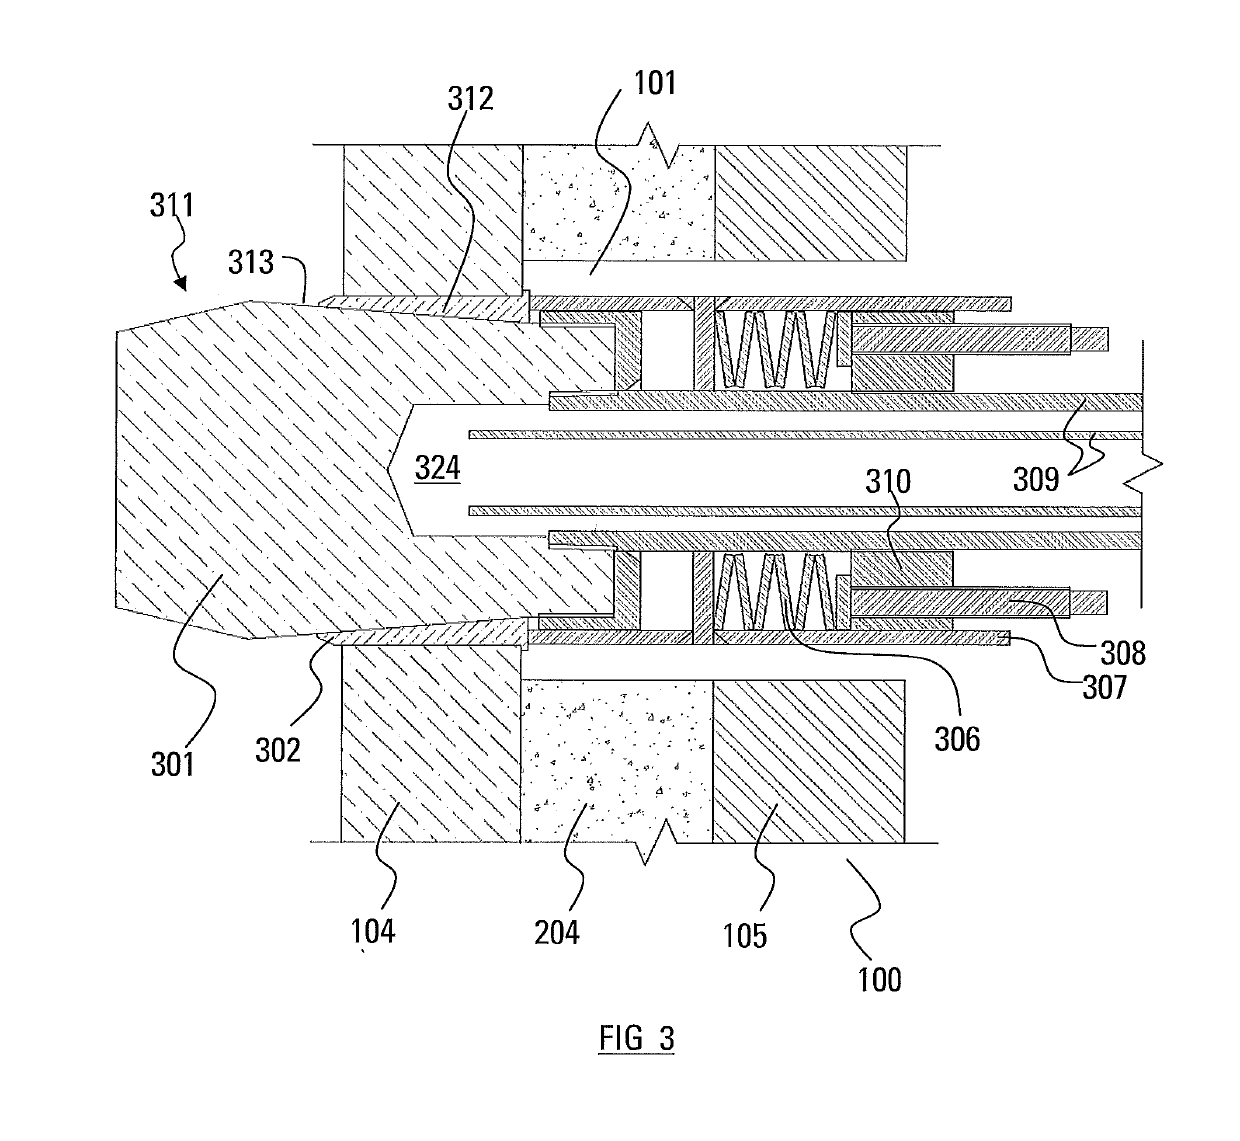 Furnace cooling system with thermally conductive joints between cooling elements